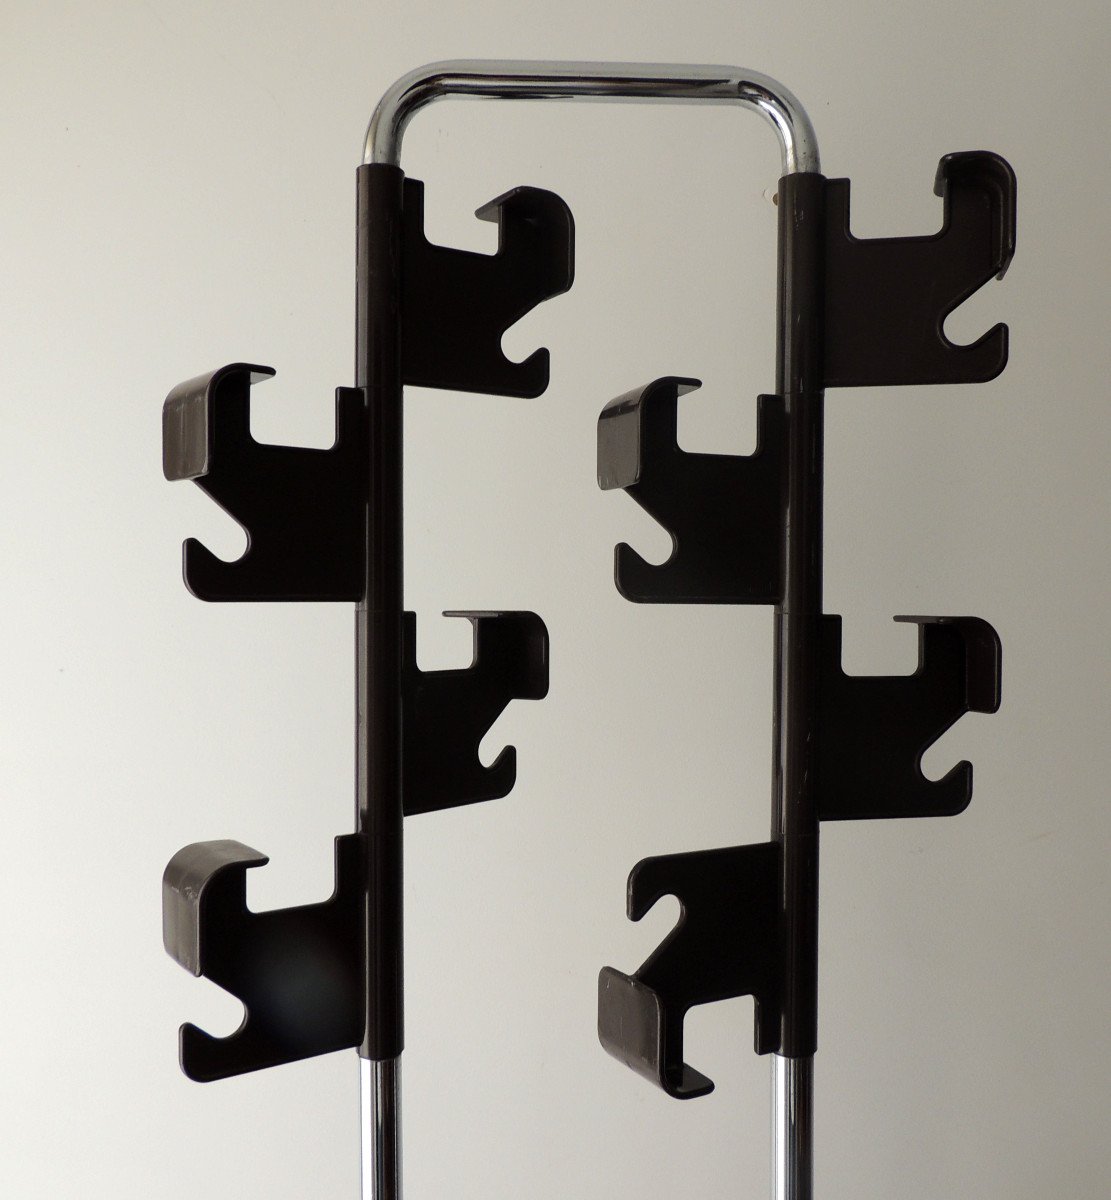 Coat Racks By Jean Pierre Vitrac For Manade, 8 Coat Hooks, In Metal And Plastic, 20th-photo-4